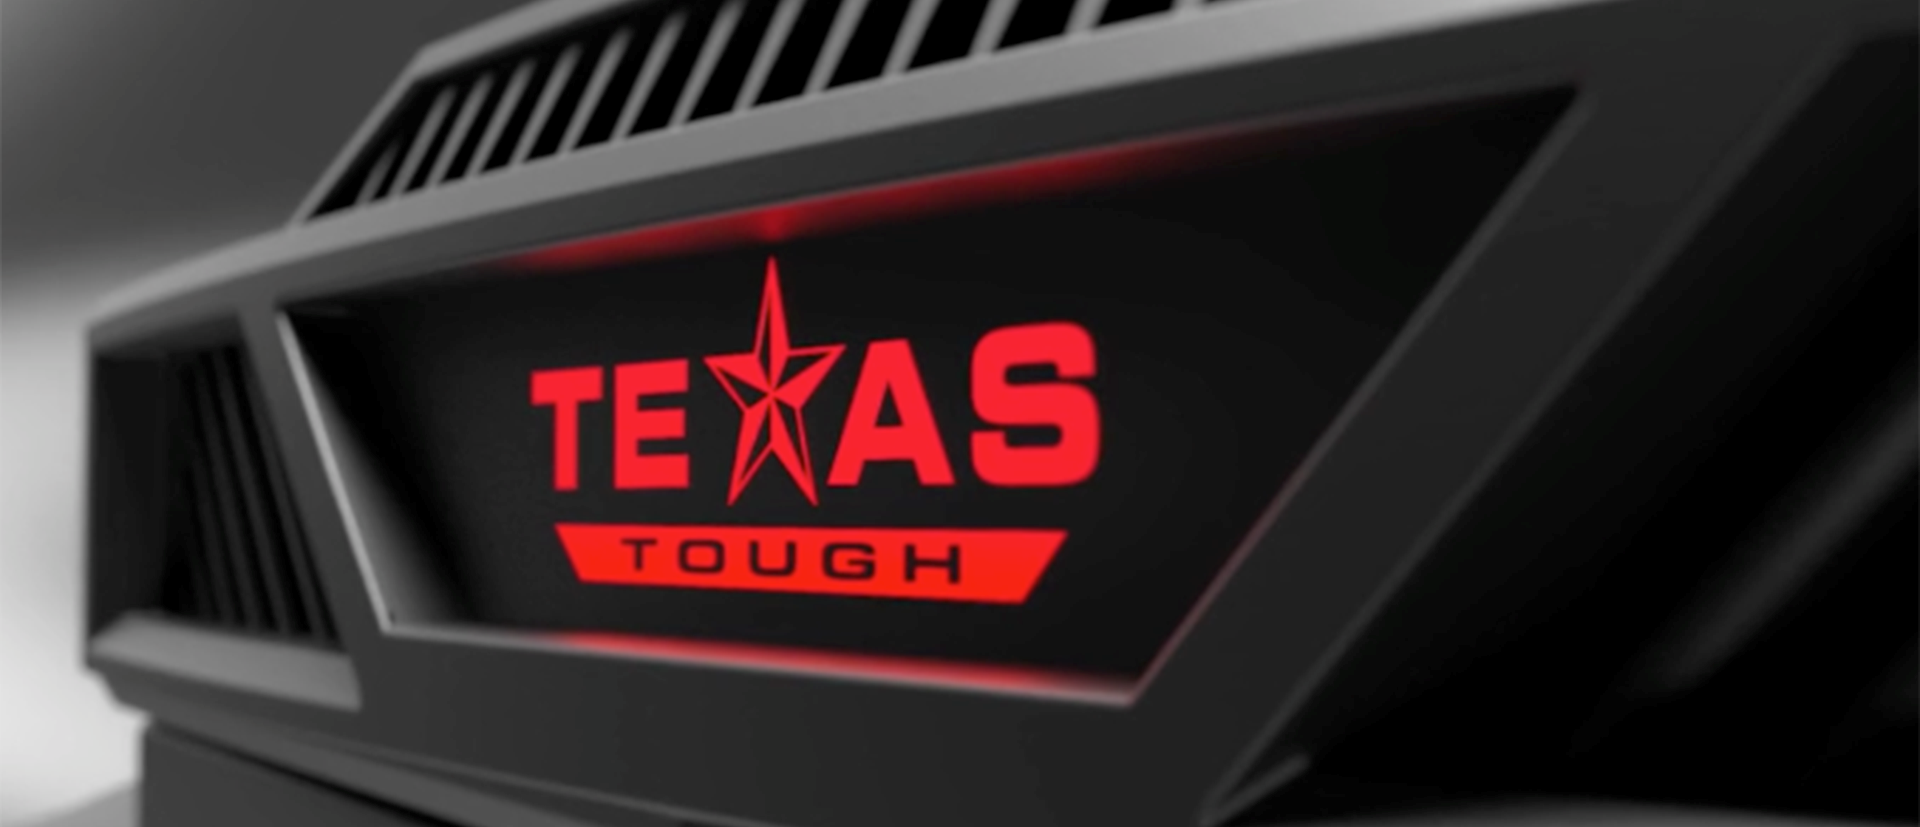 New Texas Tough Equipment Racks Include Features Never Before Incorporated Into a Cabinet